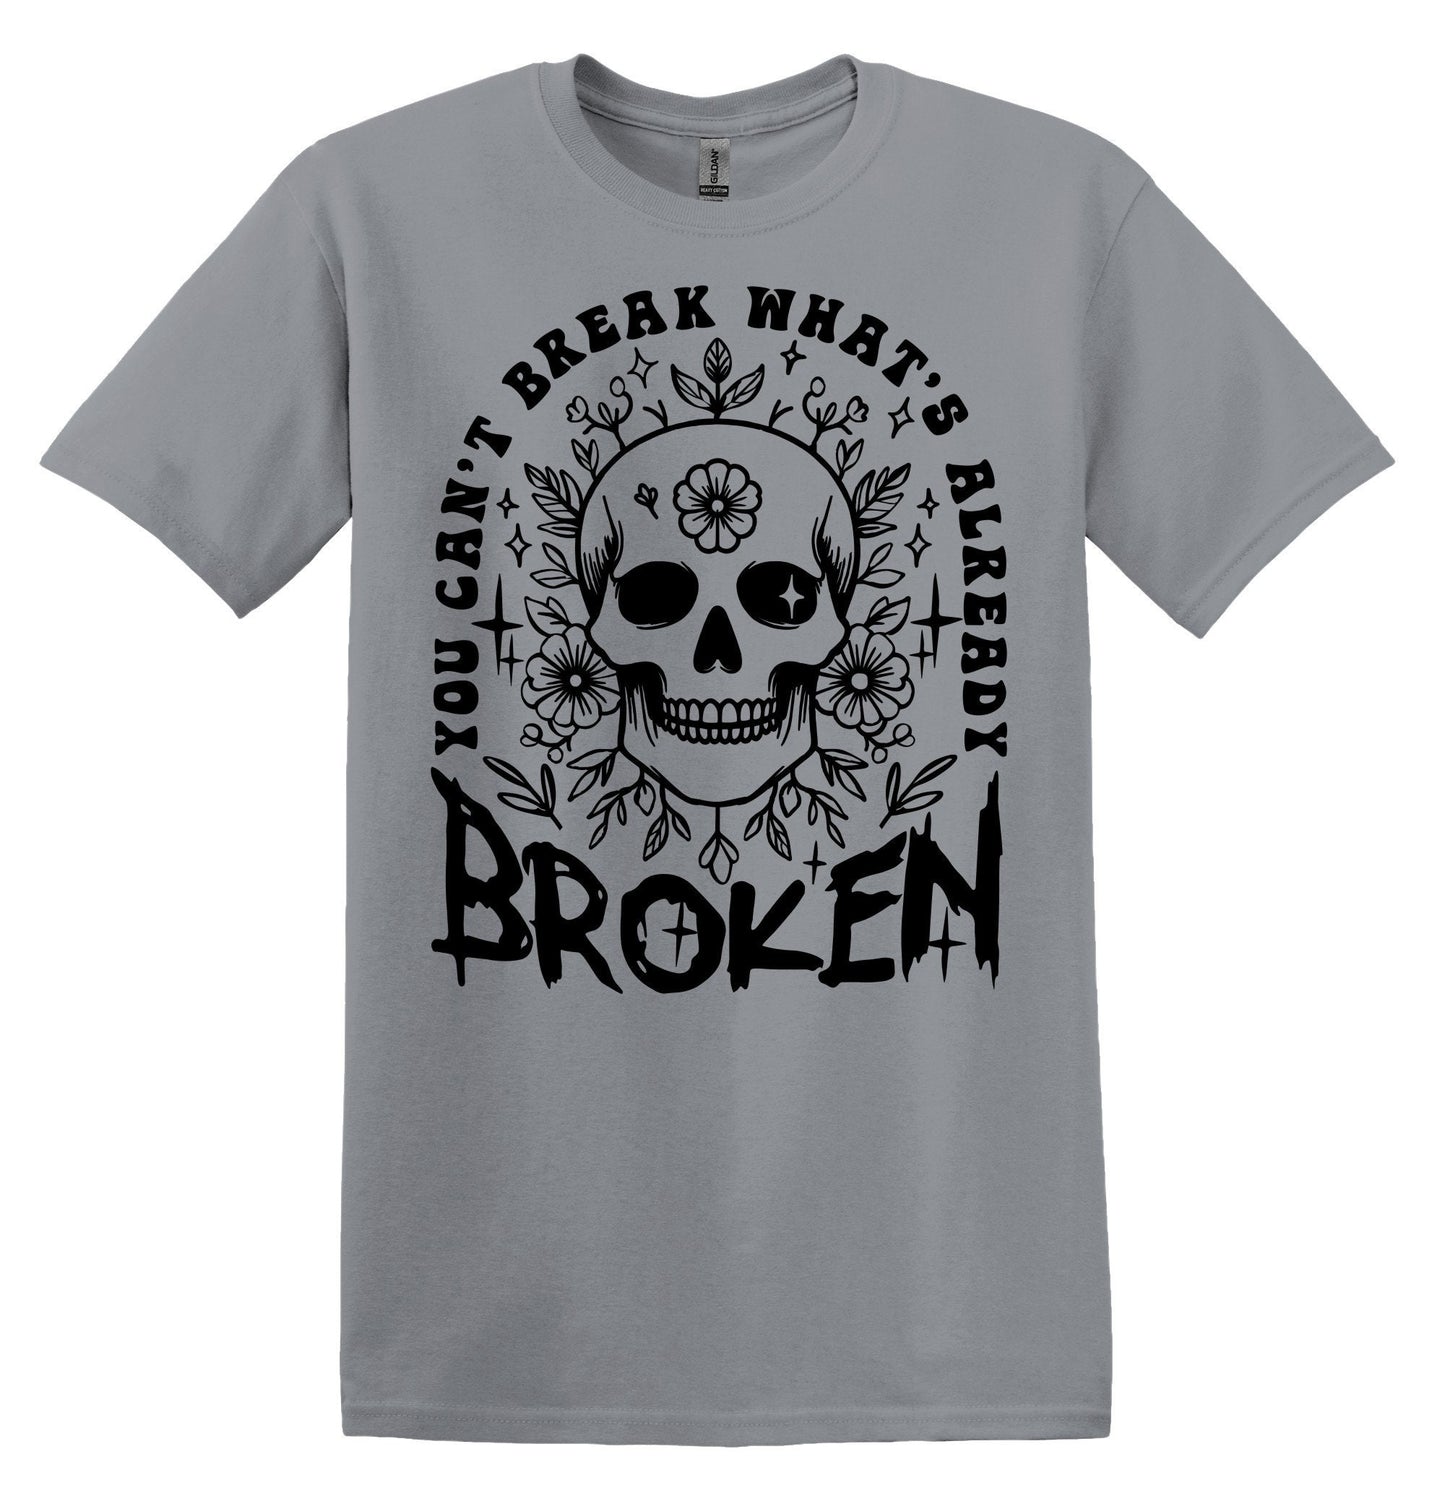 You Can't Break What's Already Broken T-shirt Graphic Shirt Funny Adult TShirt Vintage Funny TShirt Nostalgia T-Shirt Relaxed Cotton T-Shirt